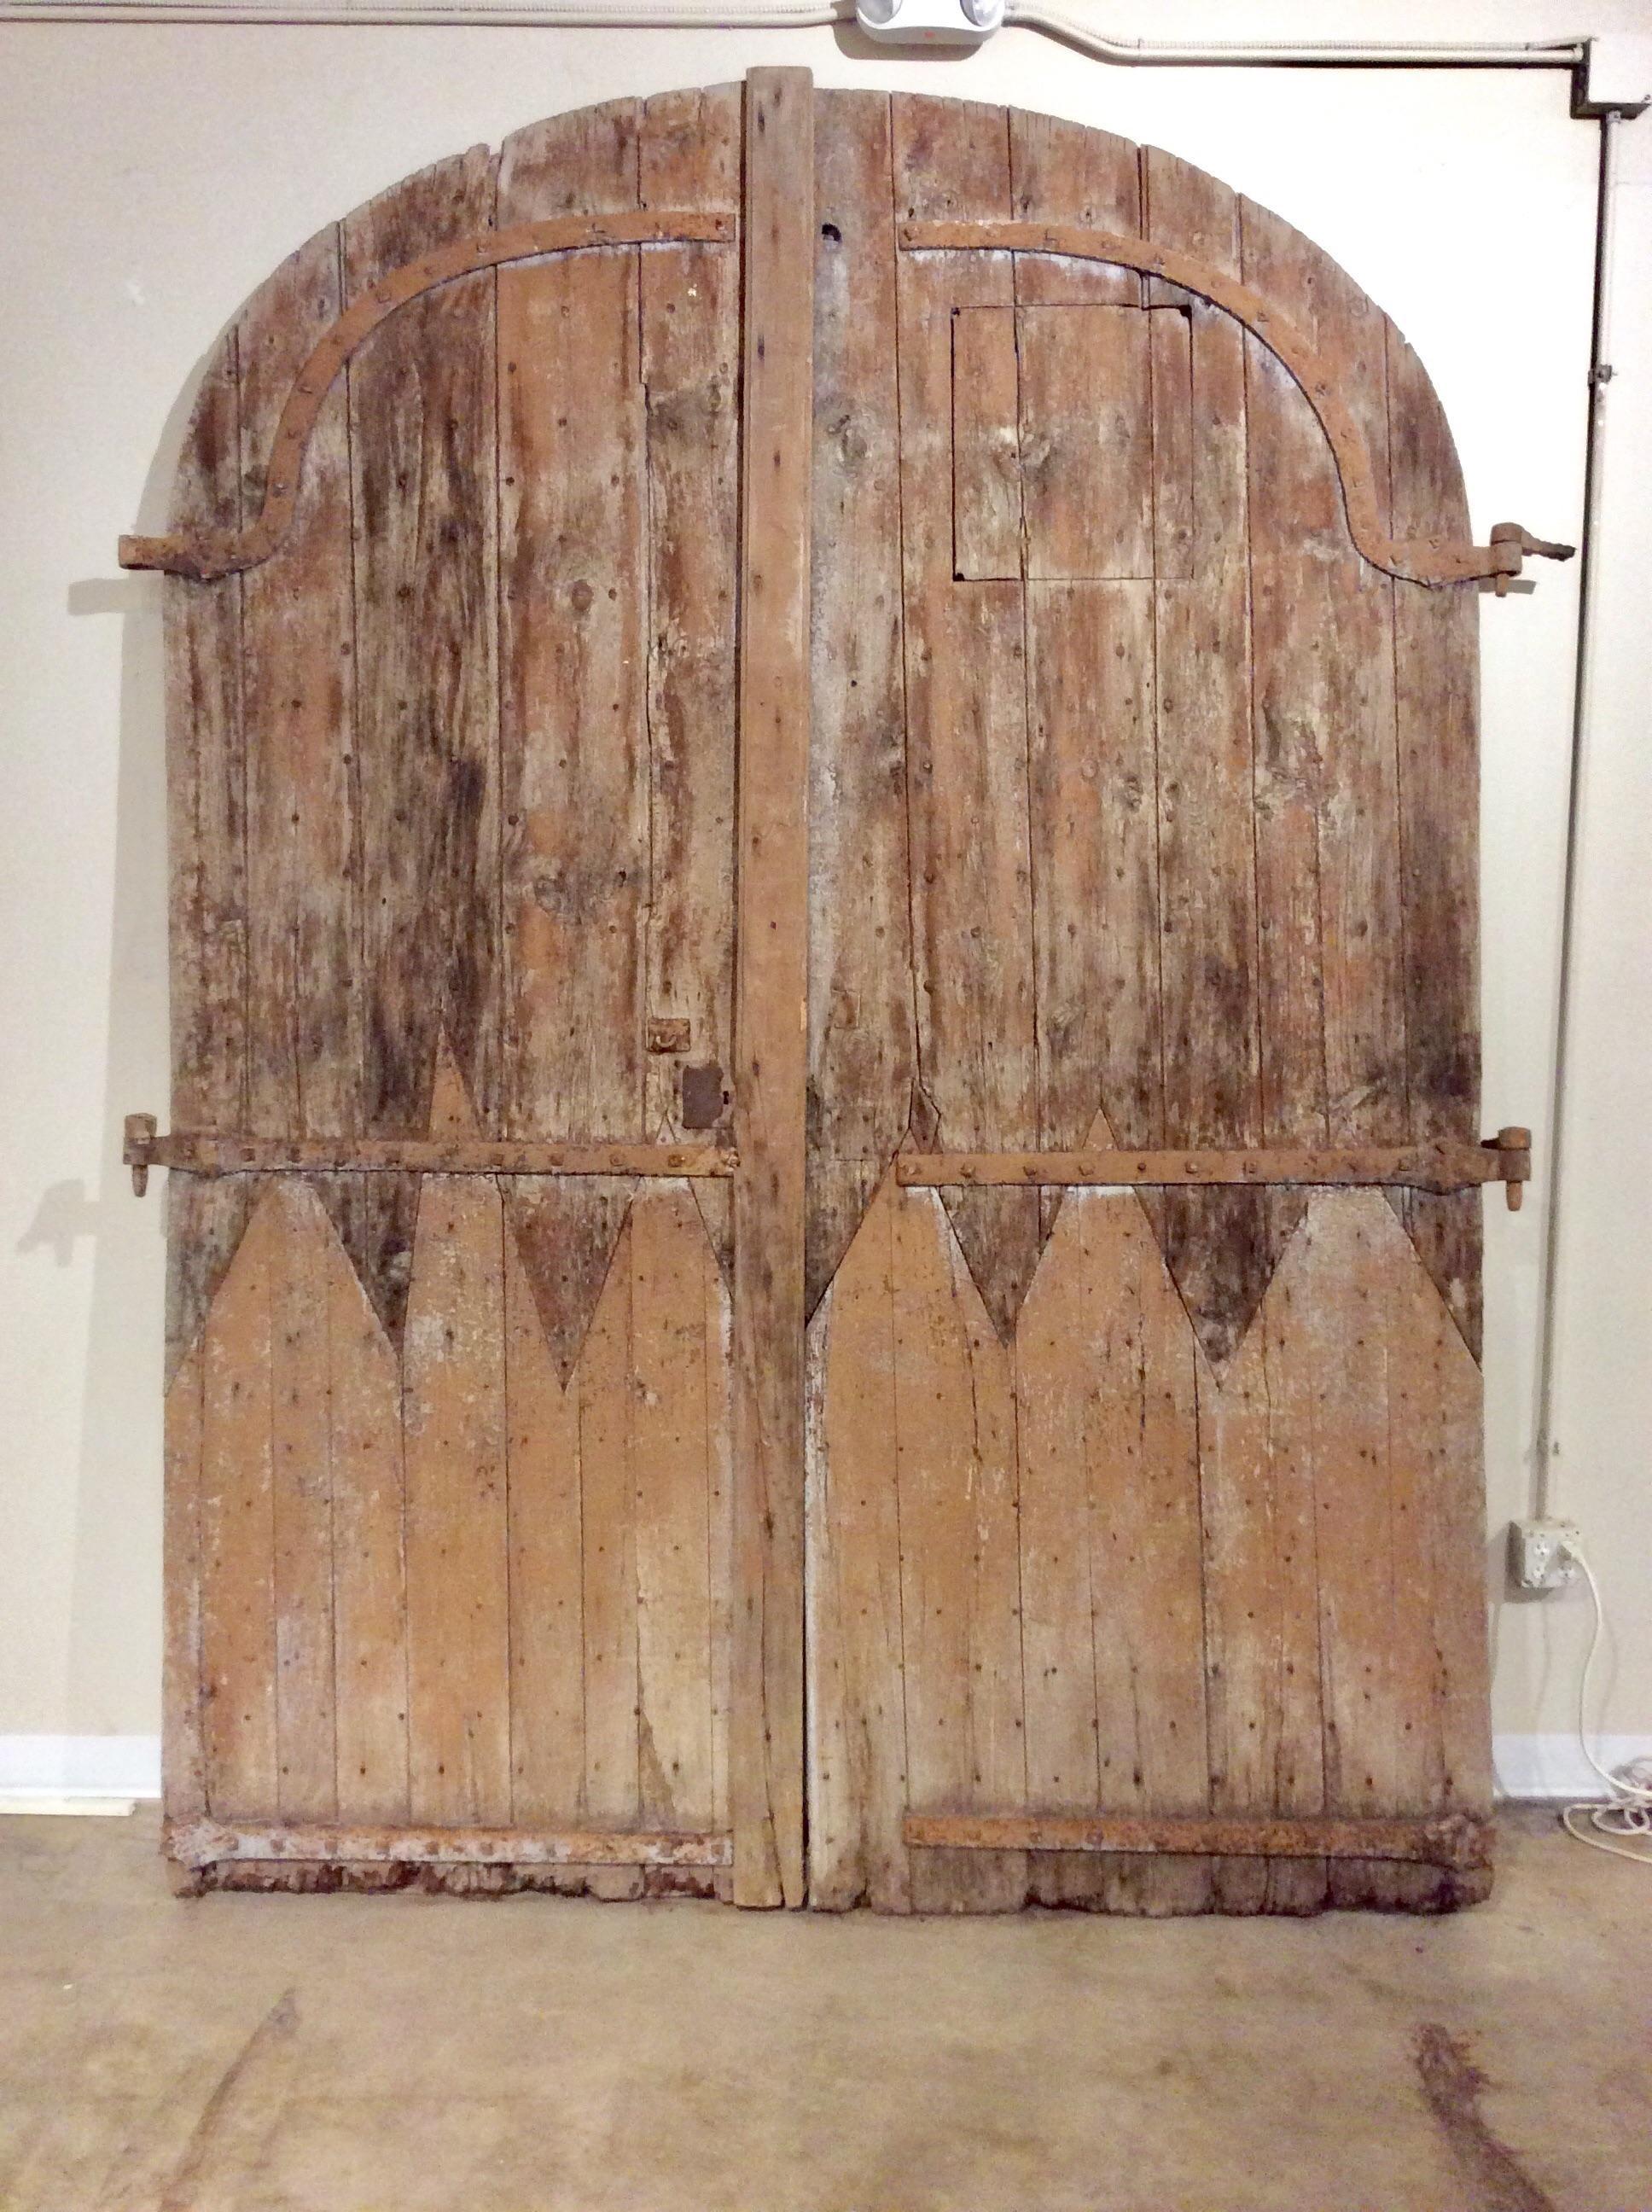 Early 1800s French Architectural Arched Wood Doors With Original Iron Hardware 6